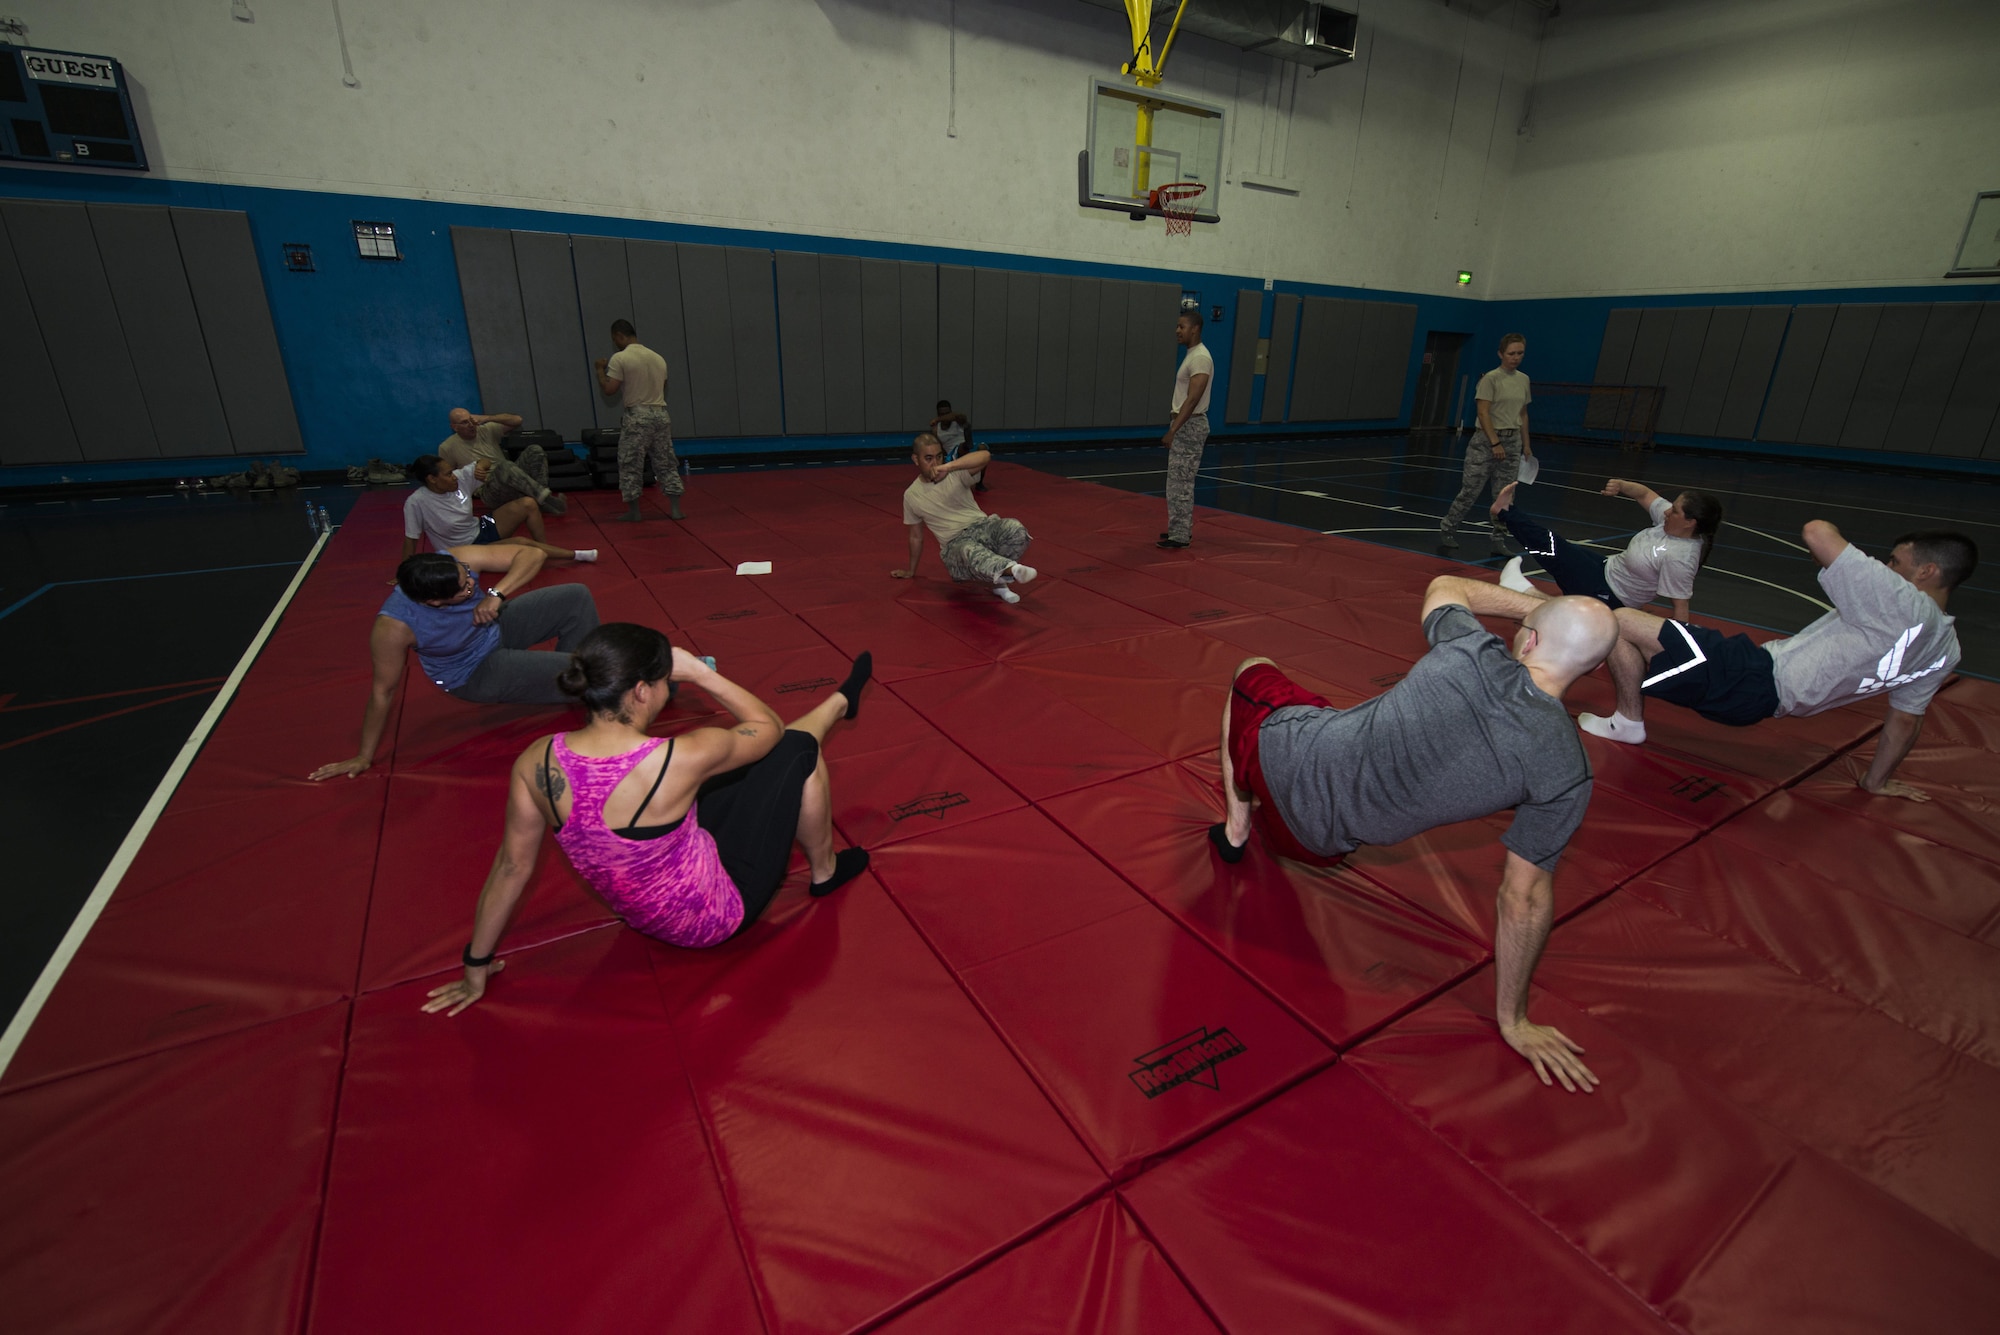 Airmen from 379th Expeditionary Security Forces Squadron instruct volunteers how to quickly put themselves back into a guarding position during a combatives class at the Blanchard-Preston Complex gym May 29, 2015 at Al Udeid Air Base, Qatar. Bi-weekly, members of the 379th Expeditionary Security Forces Squadron instruct members on non-lethal ways to defend themselves. (U.S. Air Force photo byTech. Sgt. Rasheen Douglas)